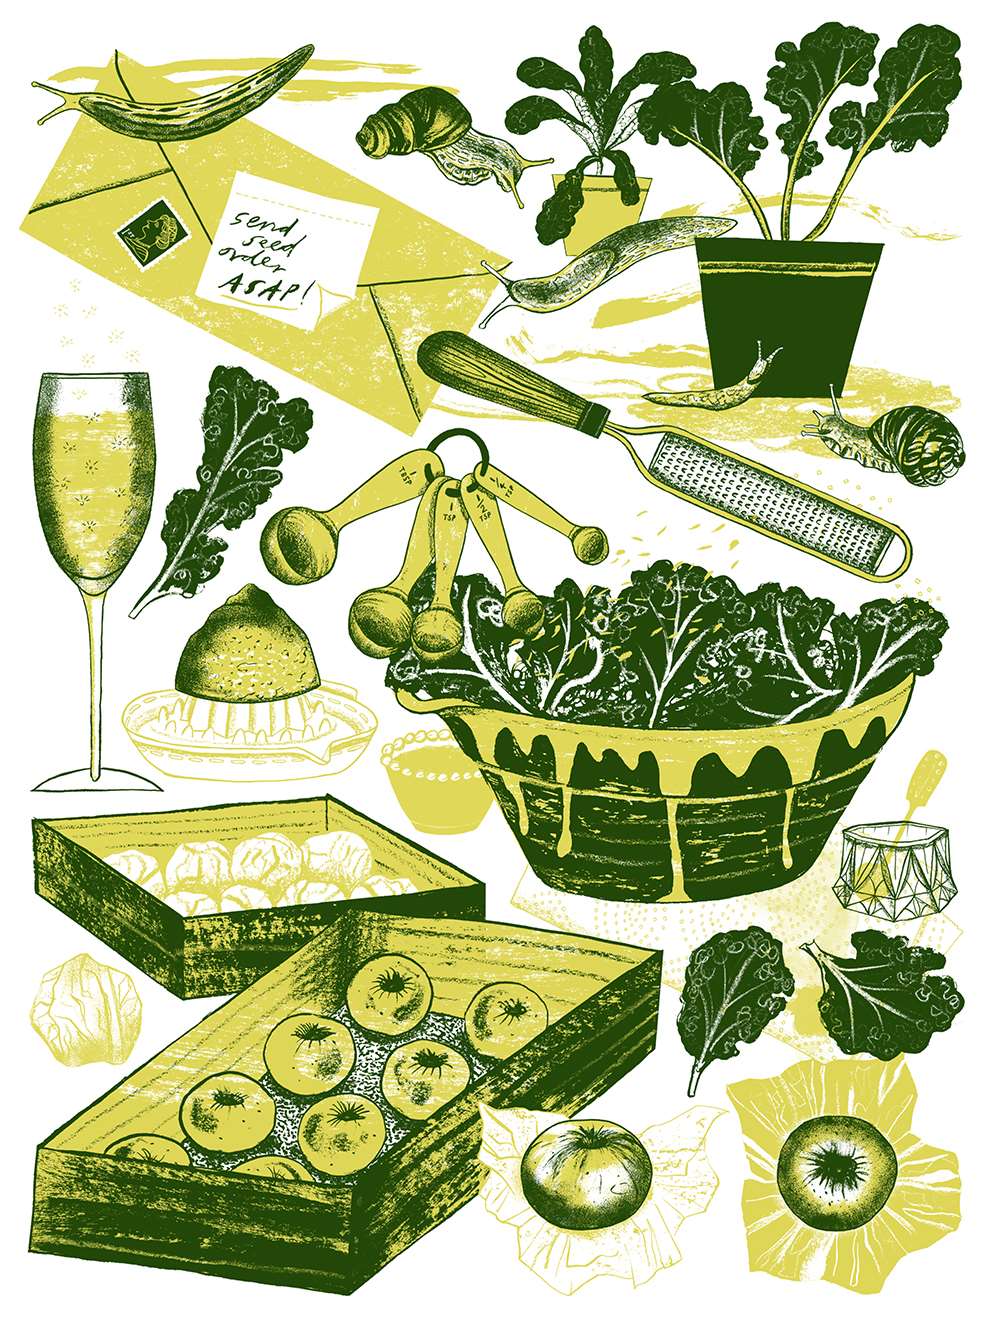 Alice Pattullo, blue printmaking spot food illustration and table elements in an etching style